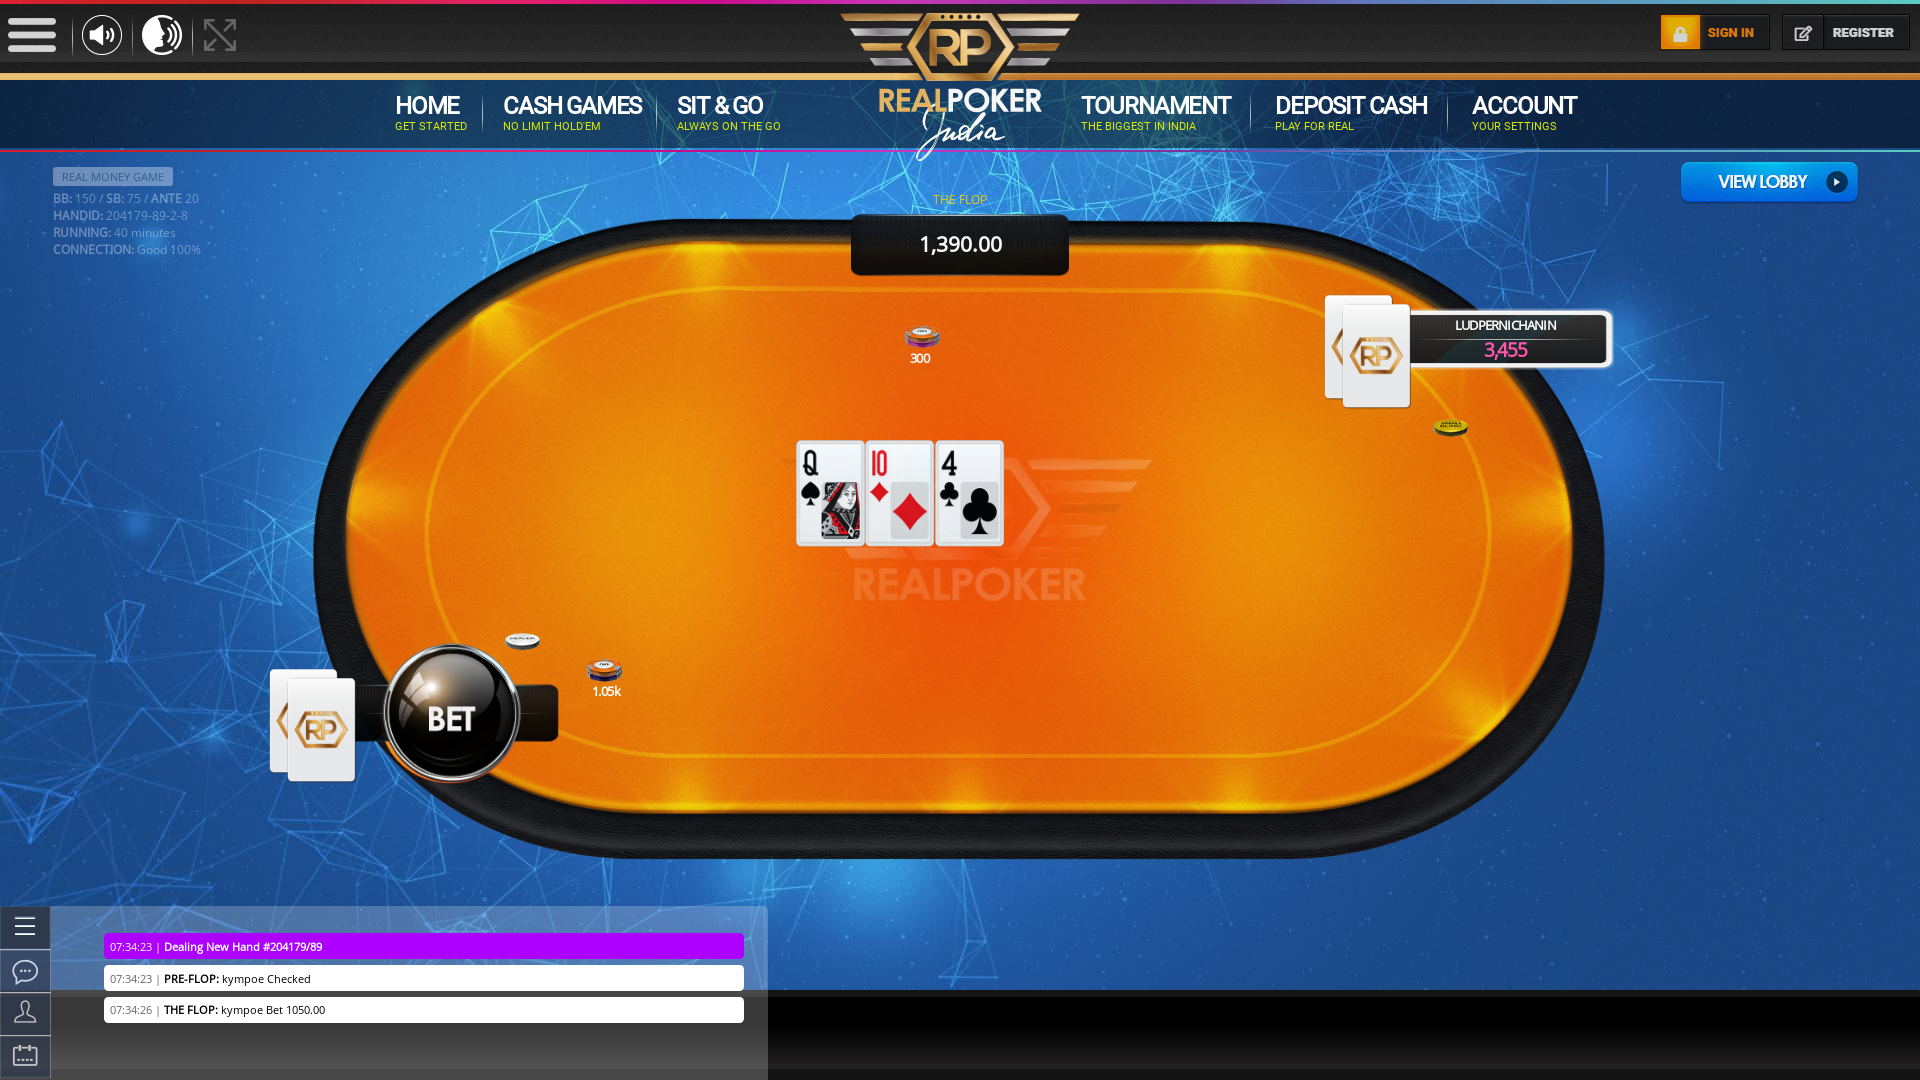 Online poker on a 10 player table in the 40th minute match up